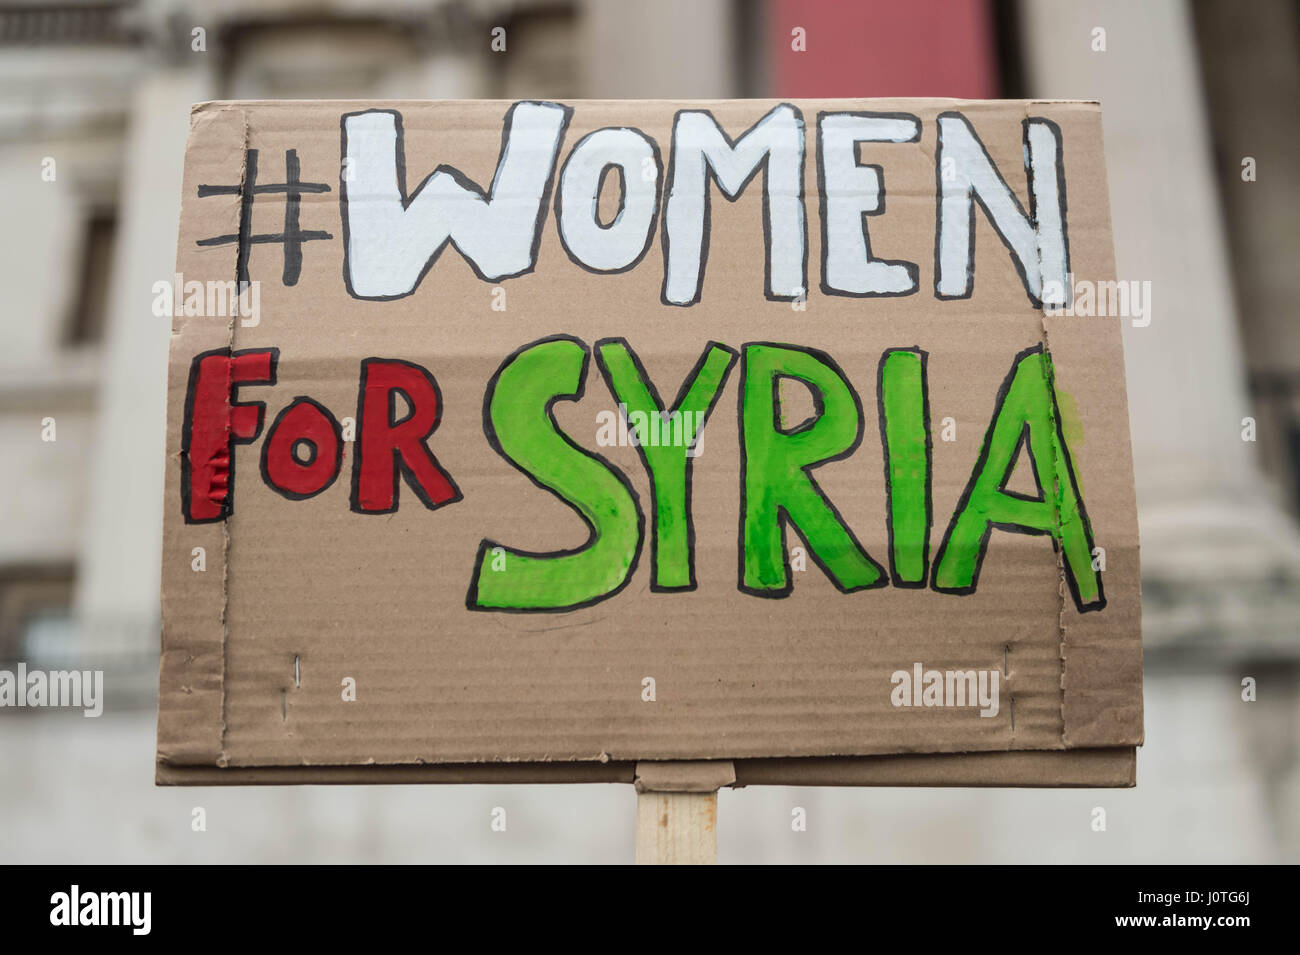 London, UK. 13th April, 2017. Women For Syria Vigil. Women and supporters attend a vigil and rally in Trafalgar Square organised by Syria Solidarity Campaign in the wake of recent atrocities in Syria to call on the British Government to allow more Syrian refugees into the UK. © Guy Corbishley/Alamy Live News Stock Photo